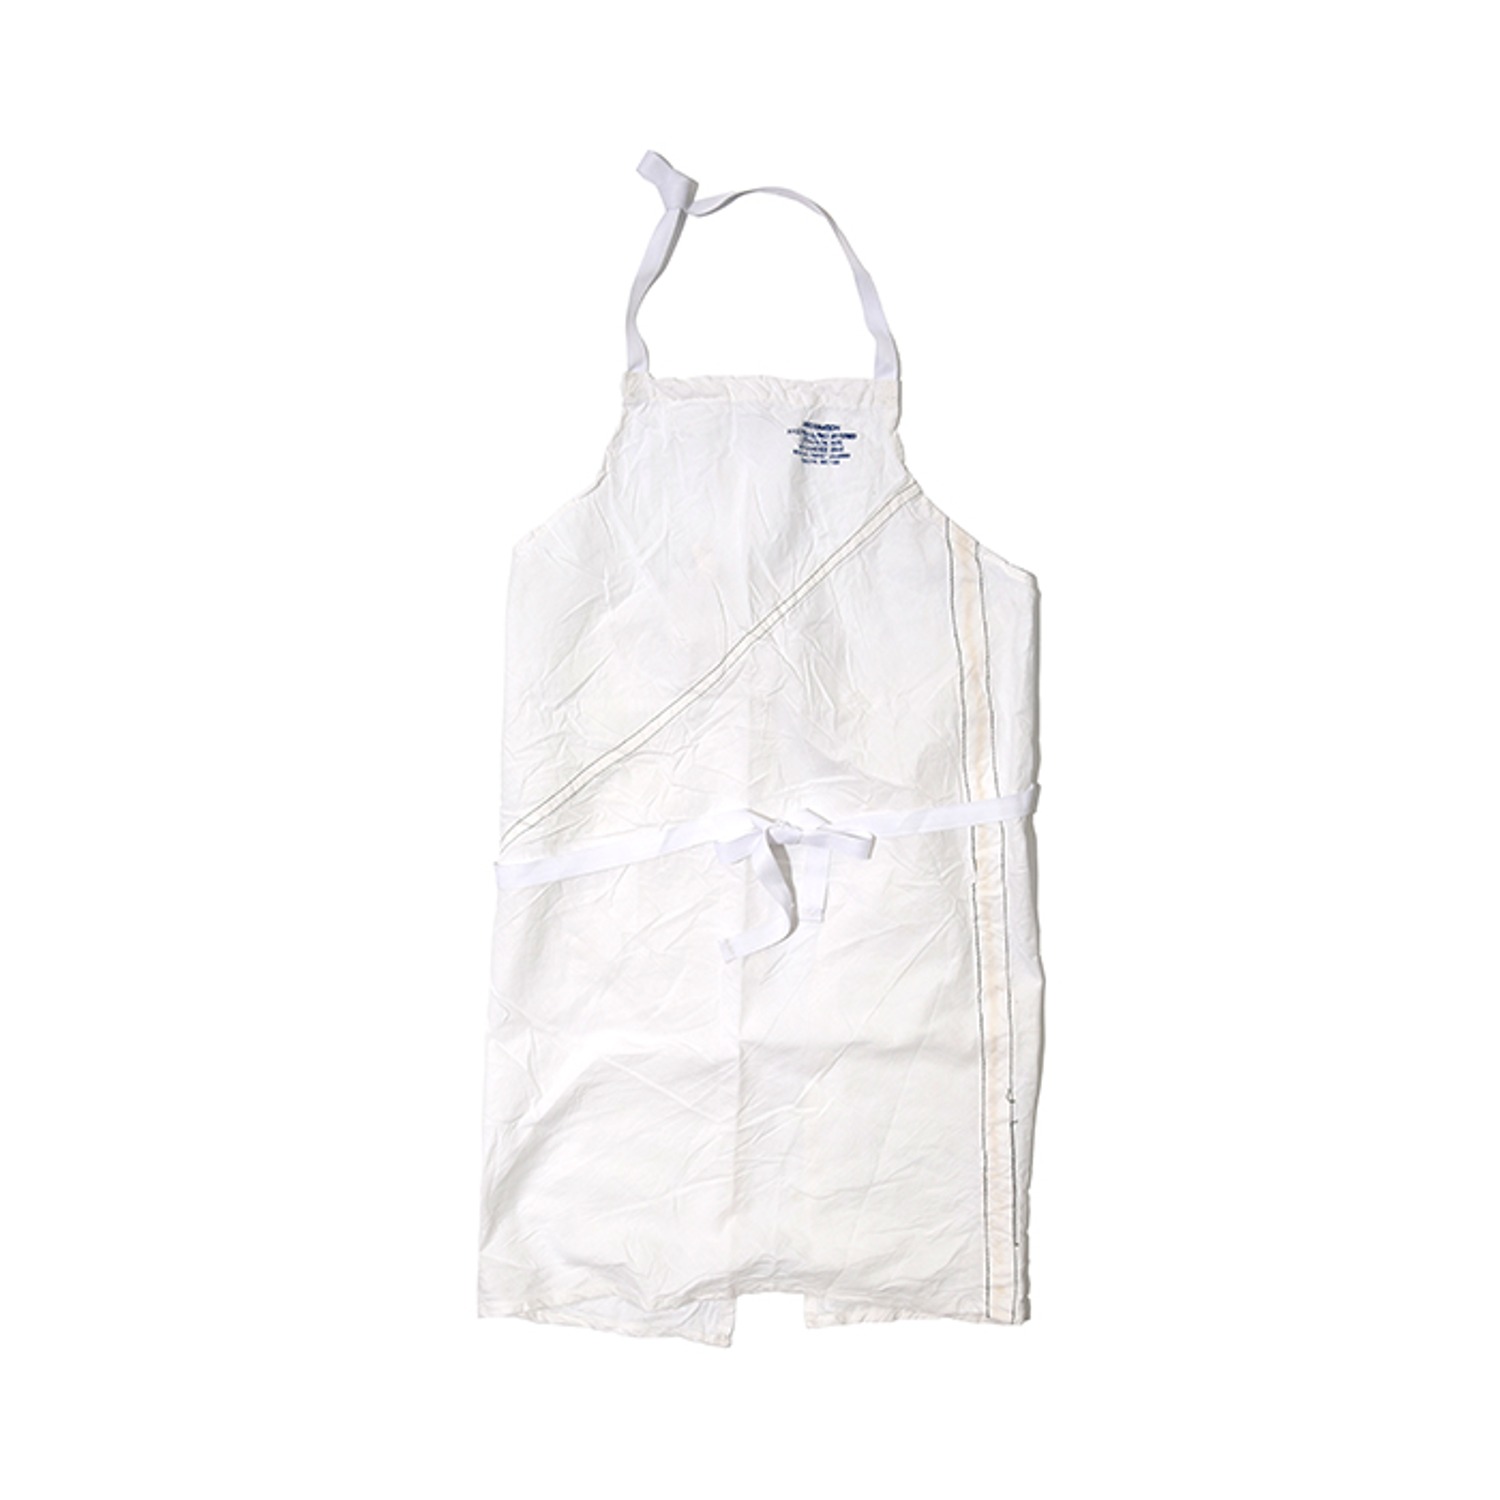 expired parachute material standard apron